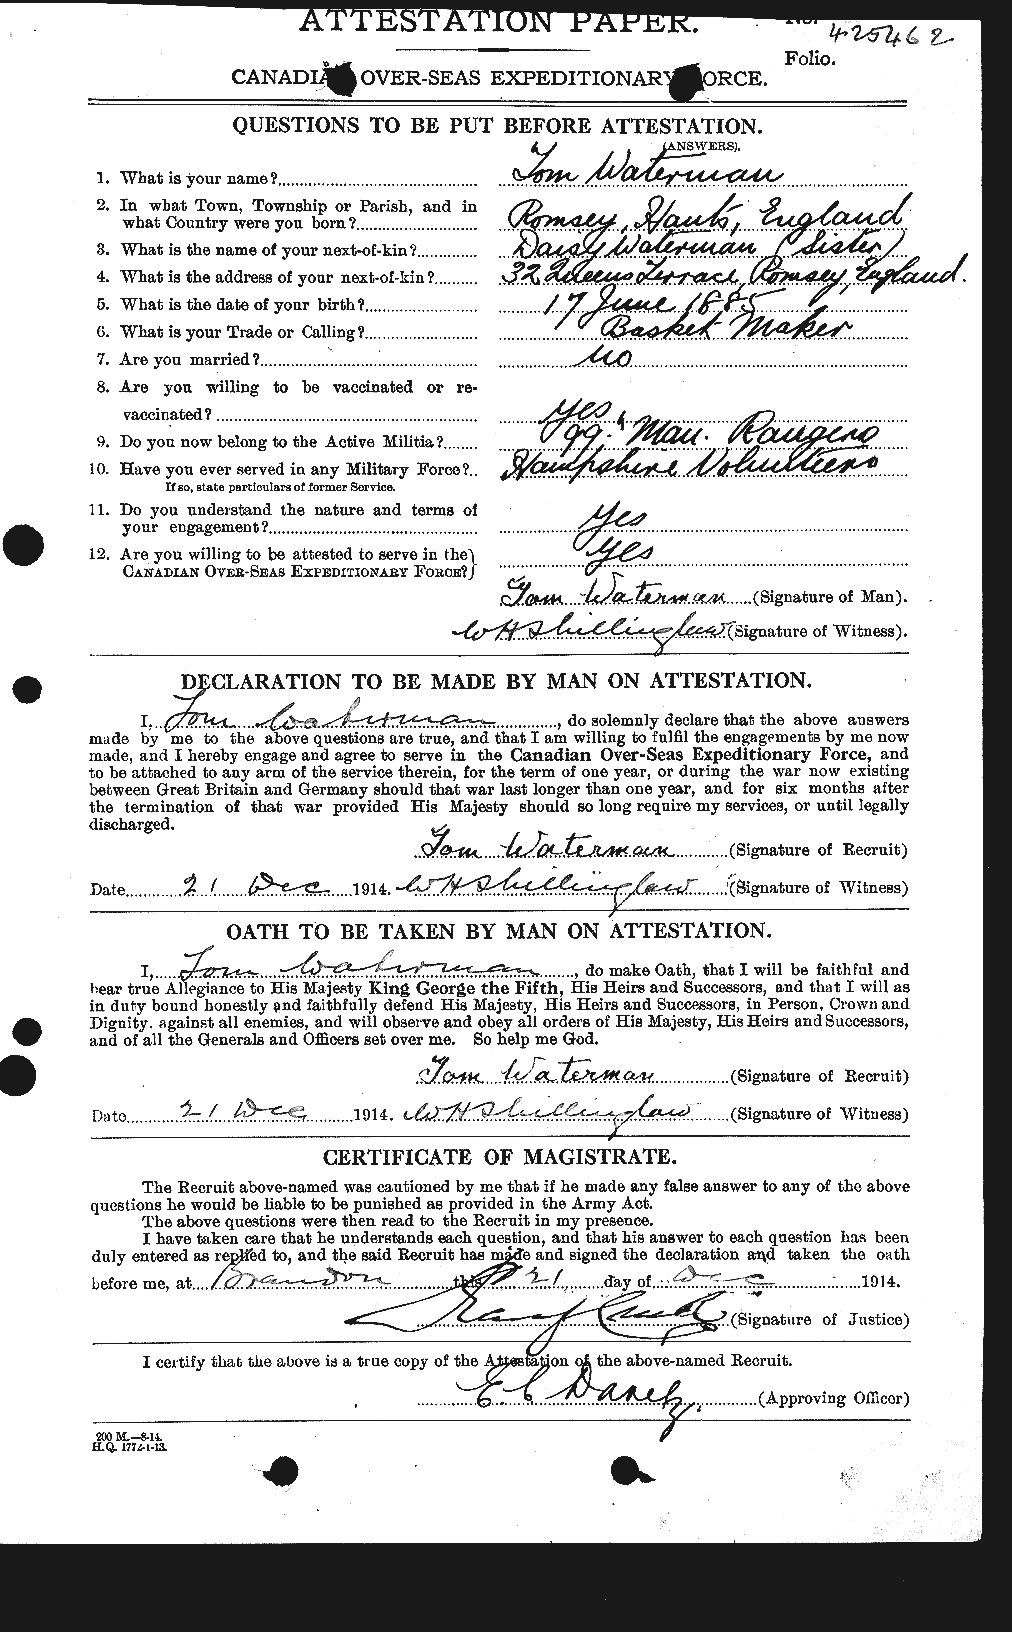 Personnel Records of the First World War - CEF 658118a